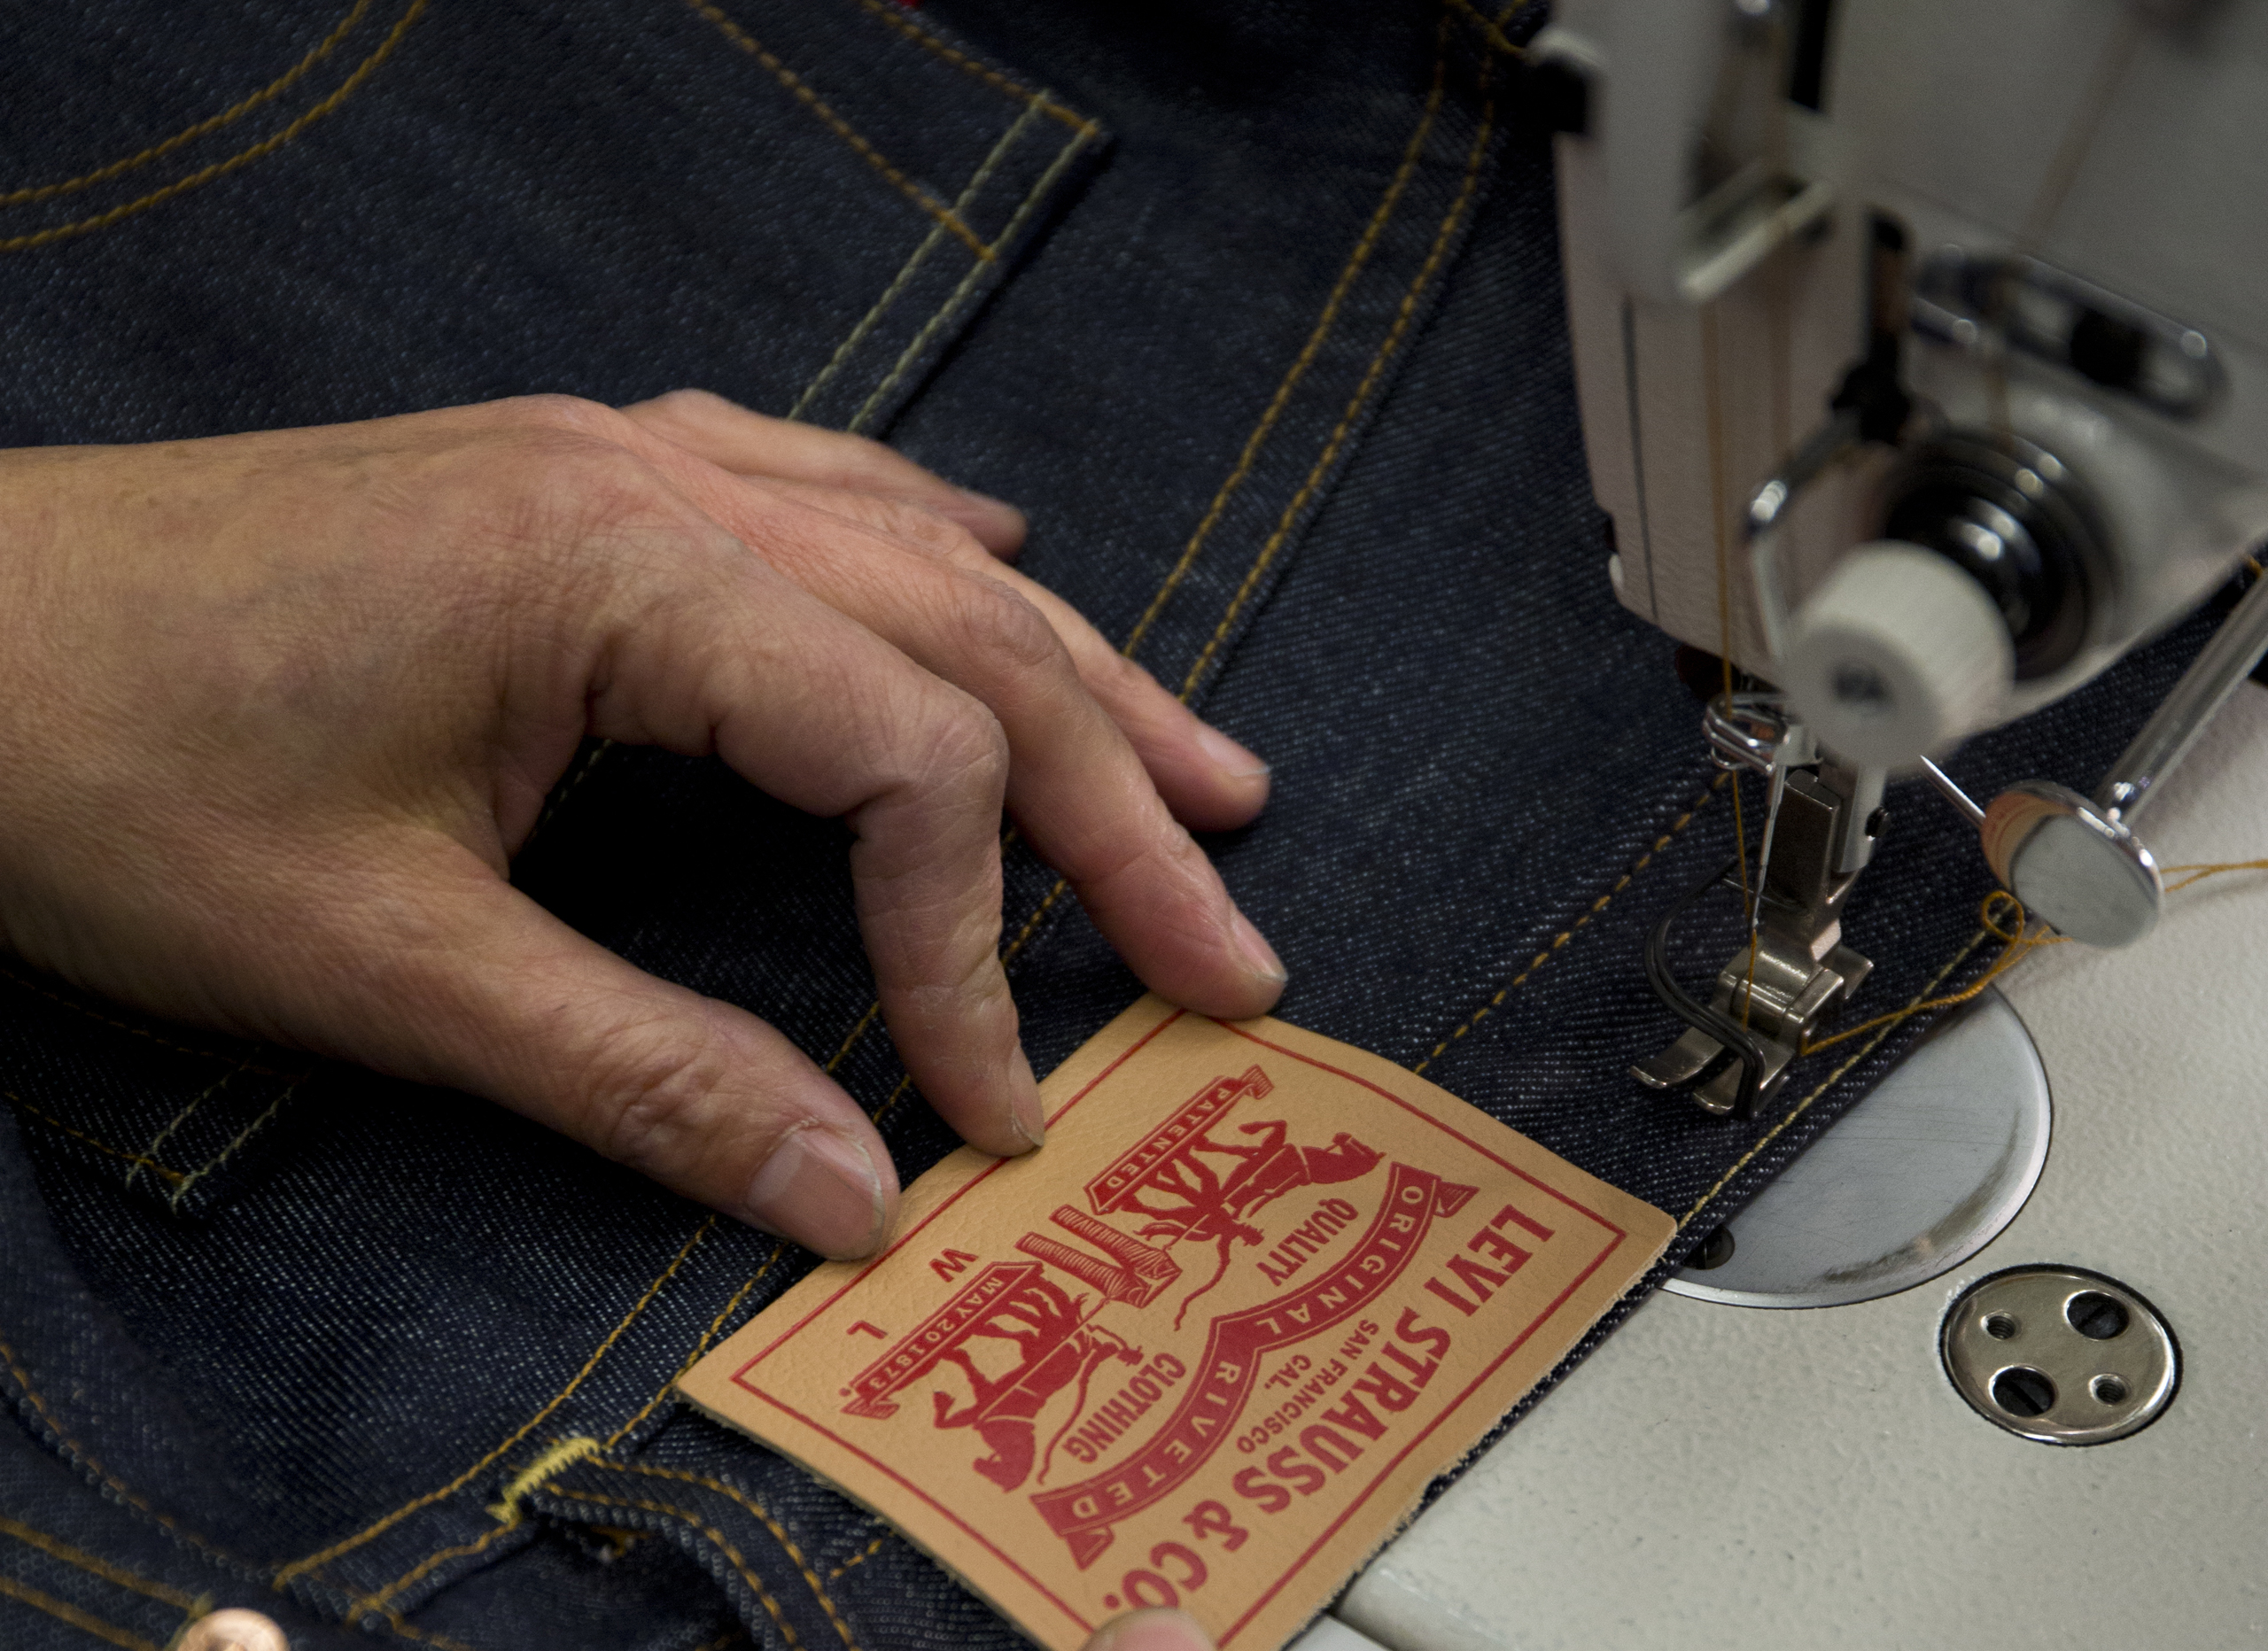 PACT Apparel Works to Transform the Supply Chain